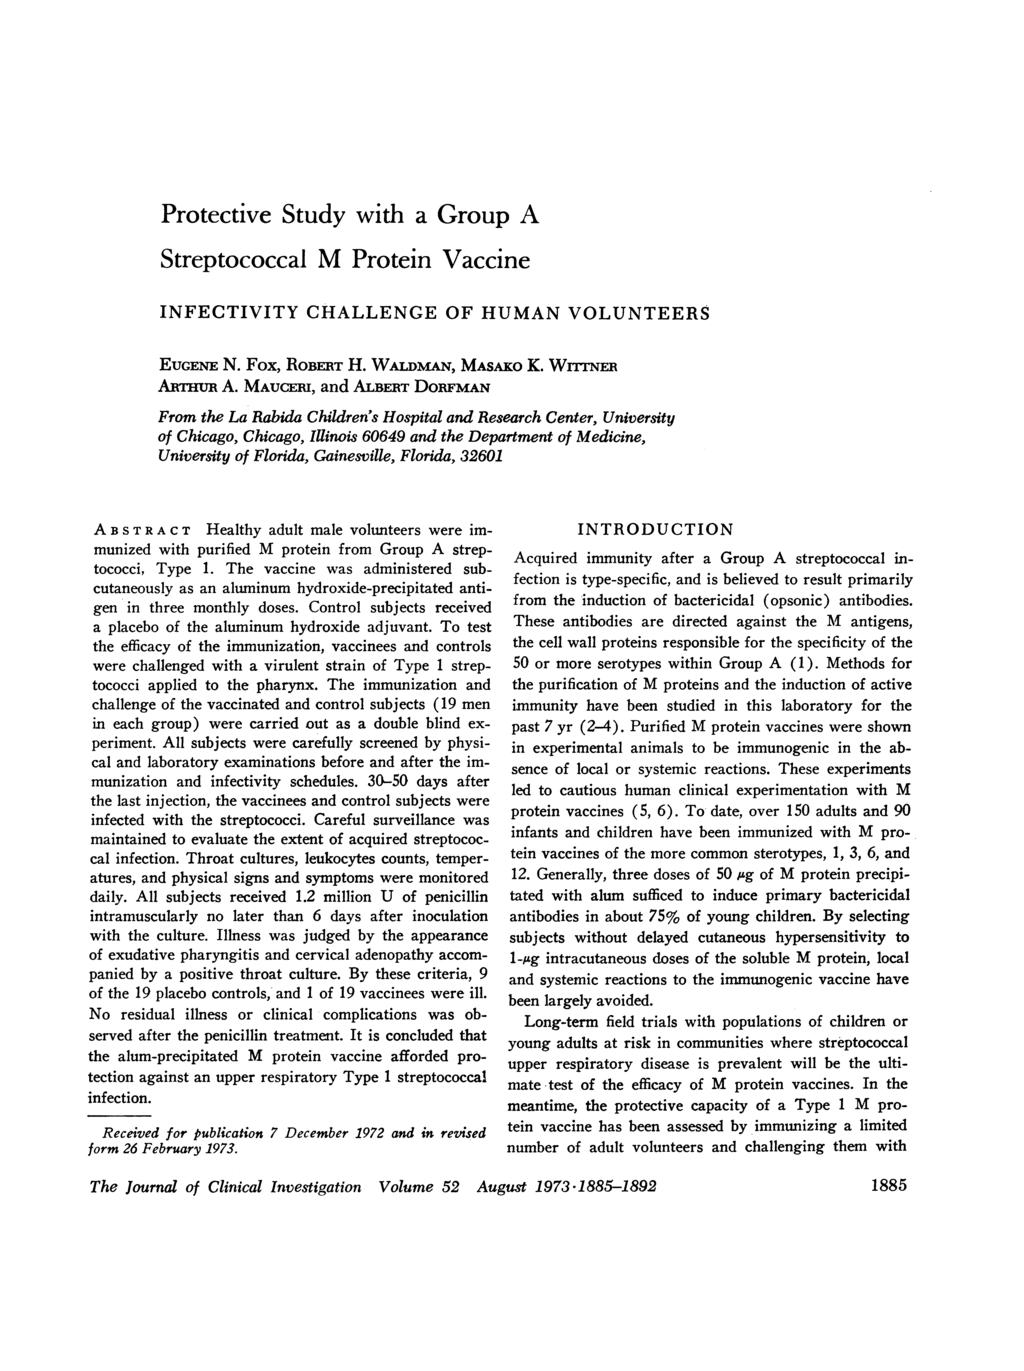 Protective Study with a Group A Streptococcal M Protein Vaccine INFECTIVITY CHALLENGE OF HUMAN VOLUNTEERS EUGENE N. Fox, ROBERT H. WALDMAN, MASAKO K. WrrrNrR AmuuR A.